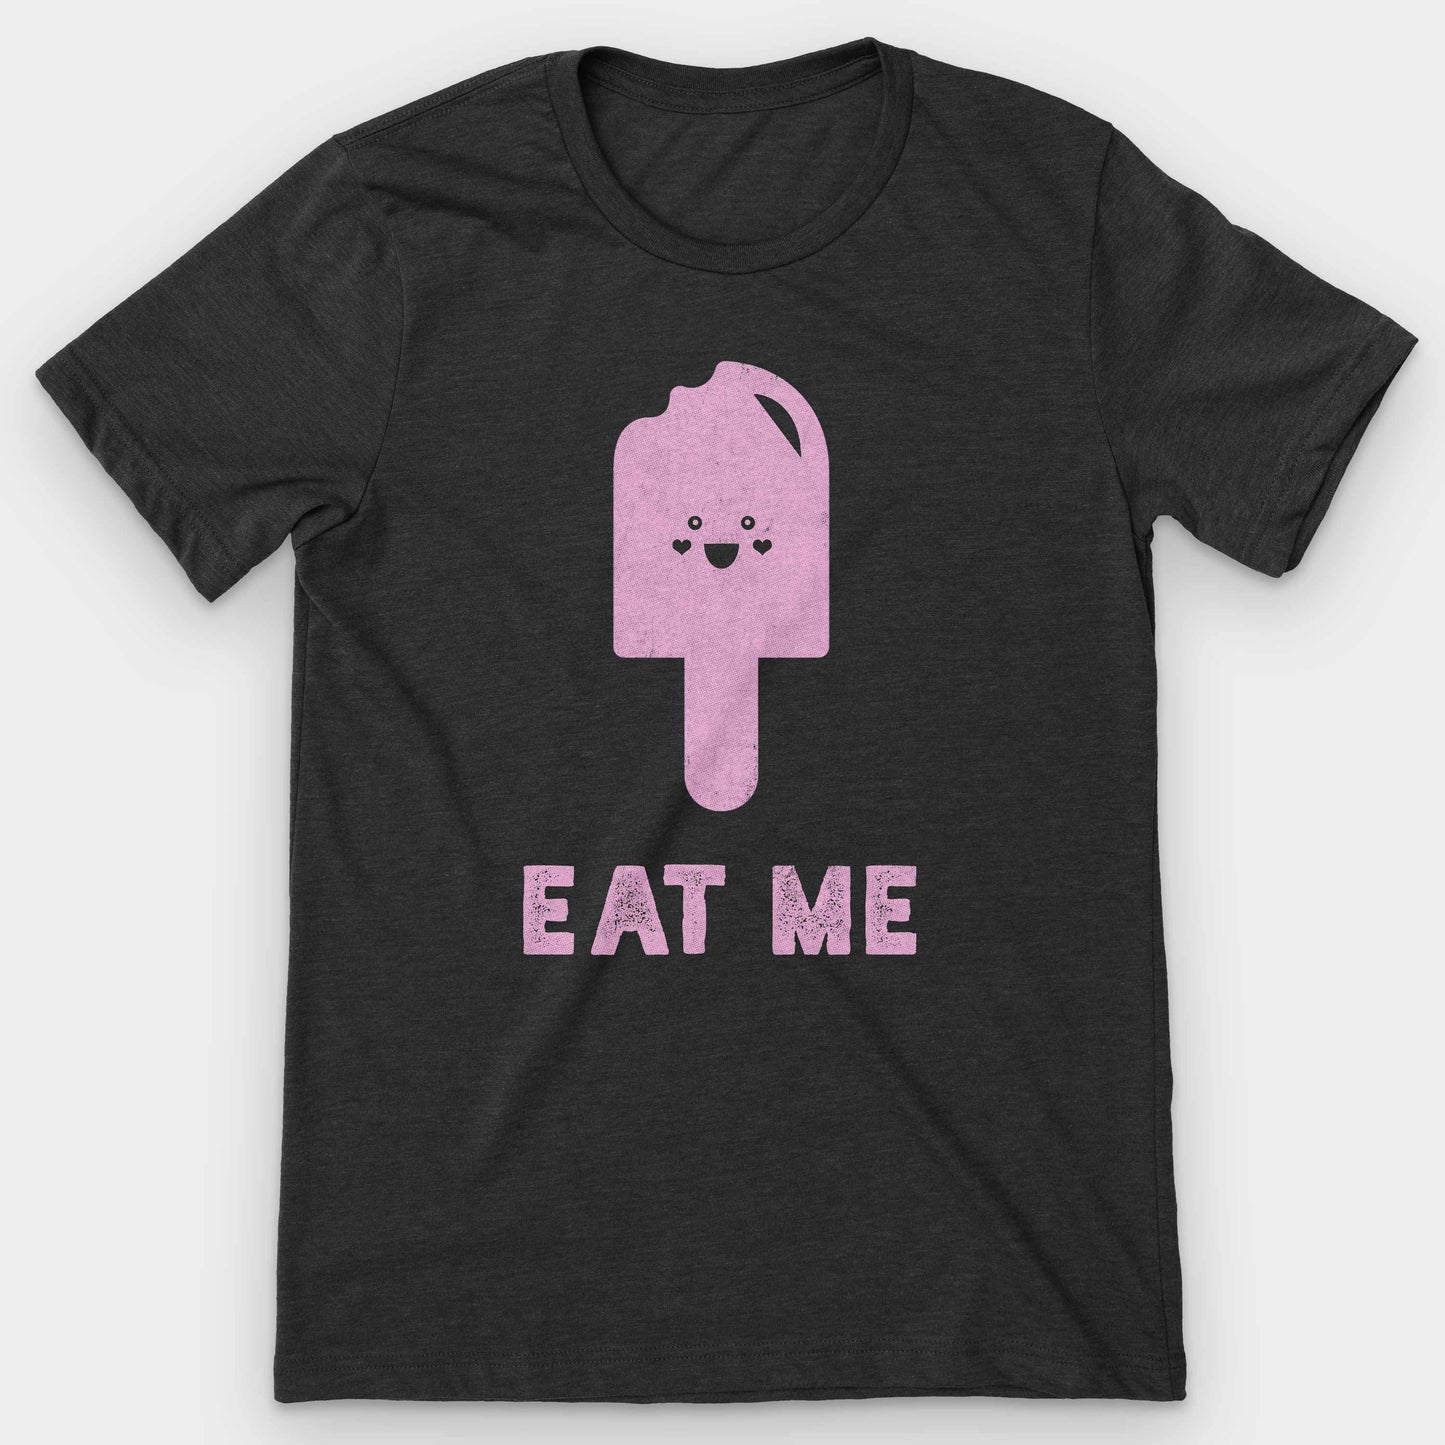 Black Heather Eat Me Graphic T-Shirt by Snaxtime